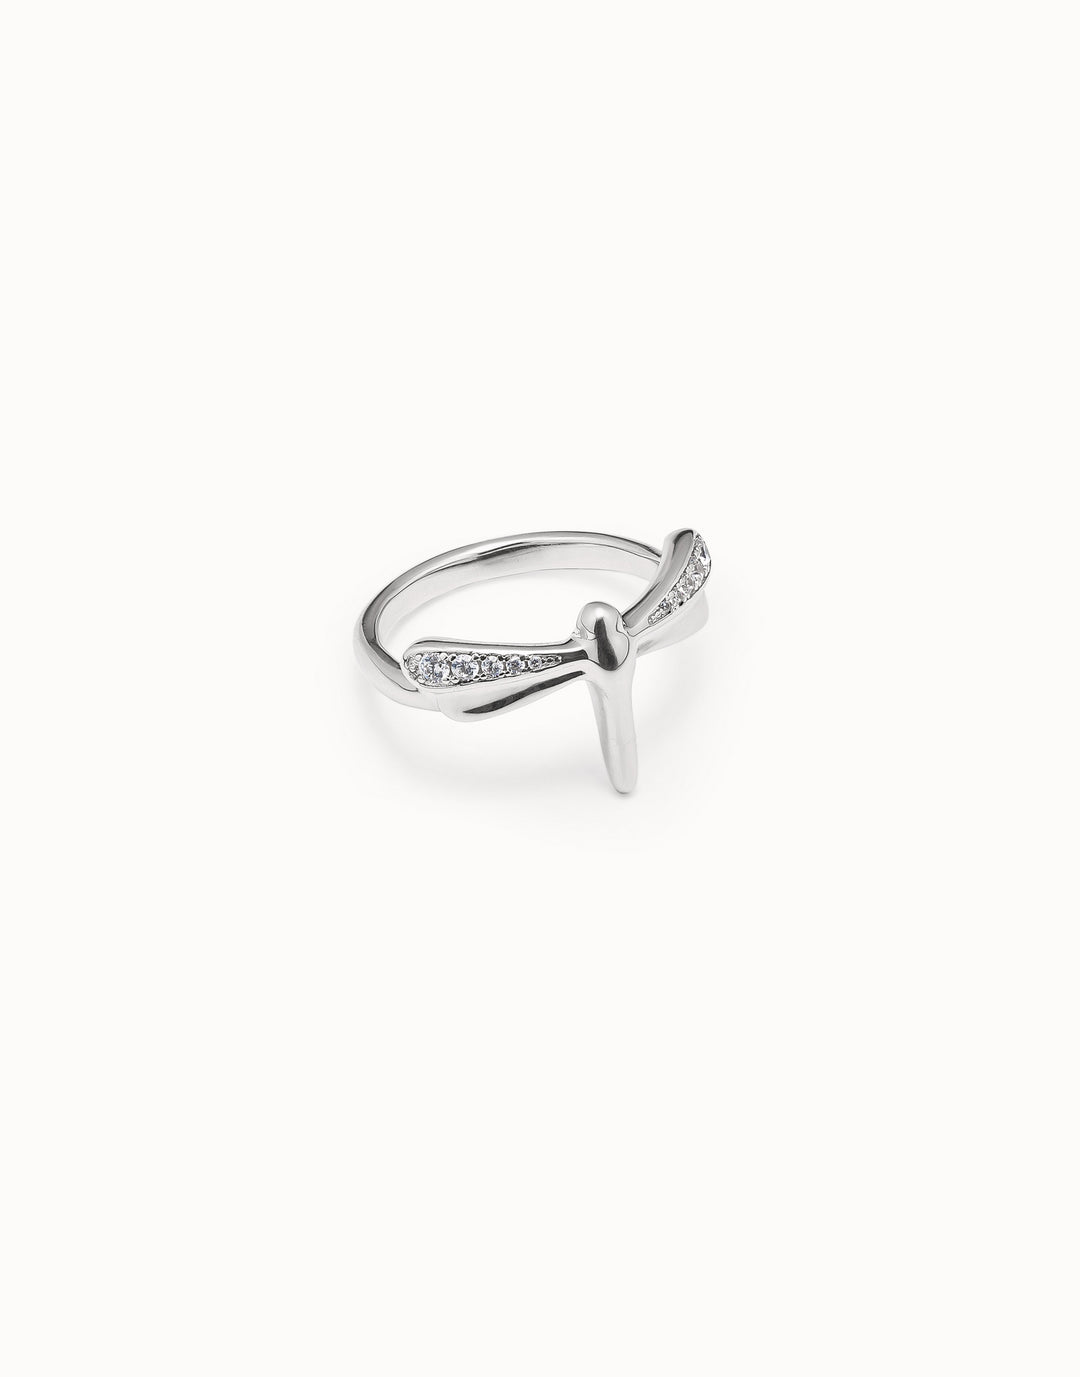 FORTUNE TOPAZ RING - SILVER - Kingfisher Road - Online Boutique